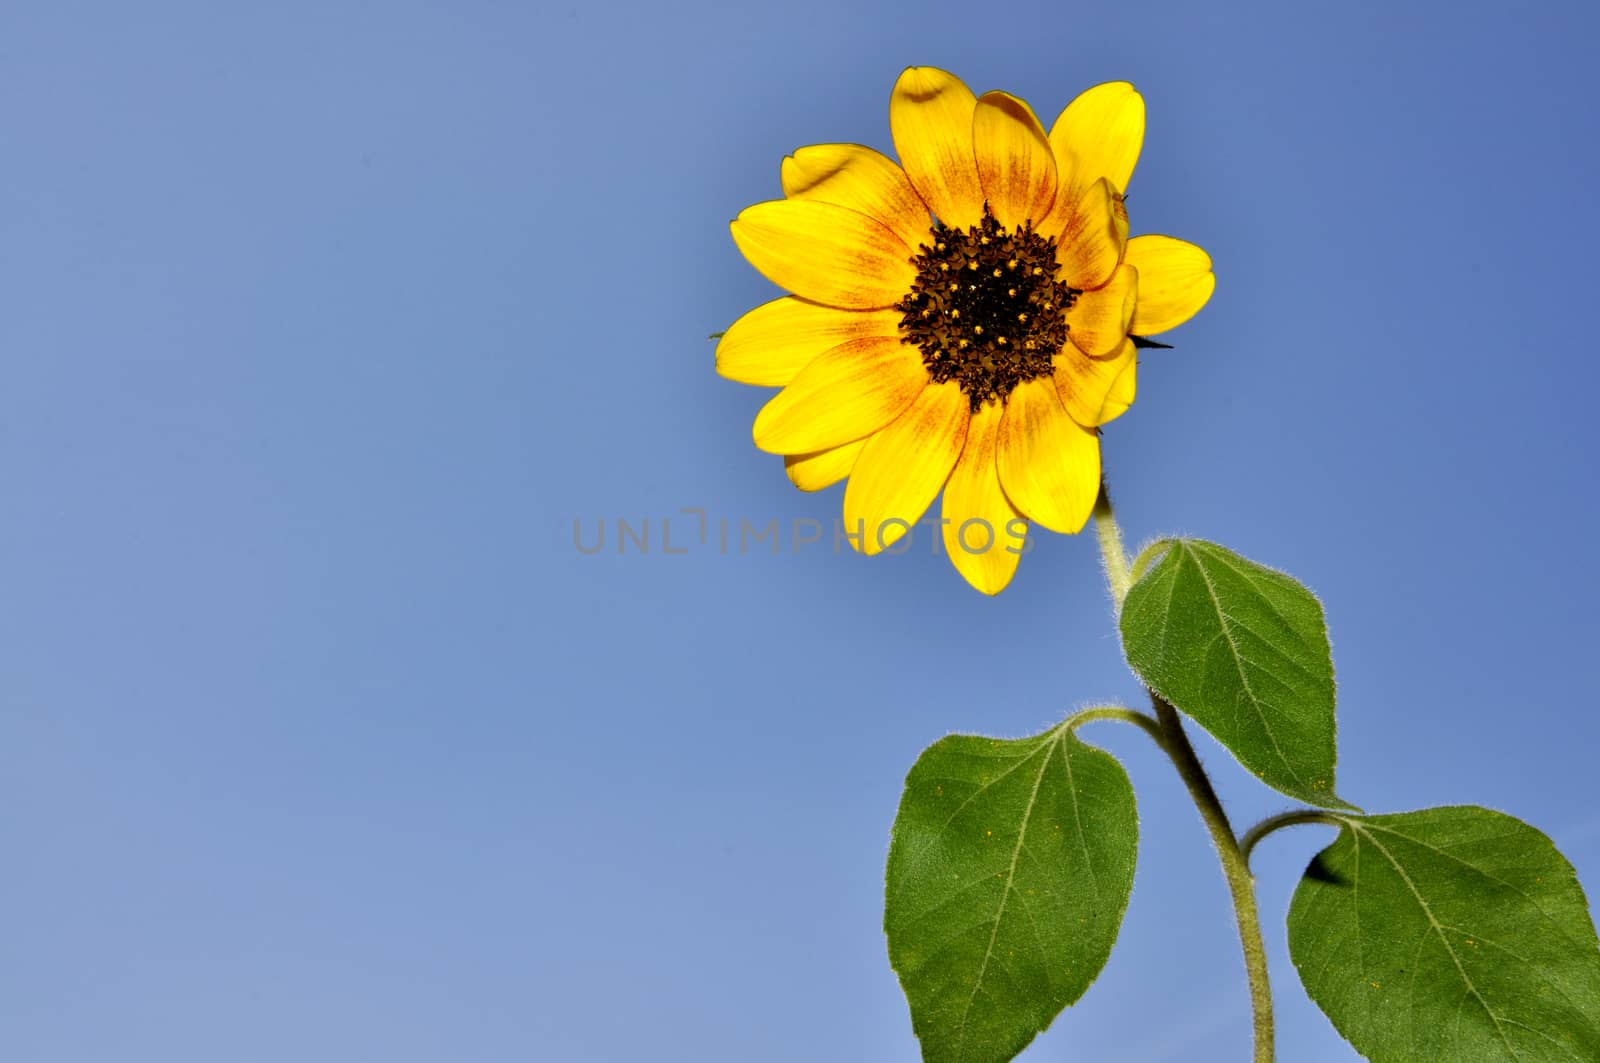 Sunflower by mixeey